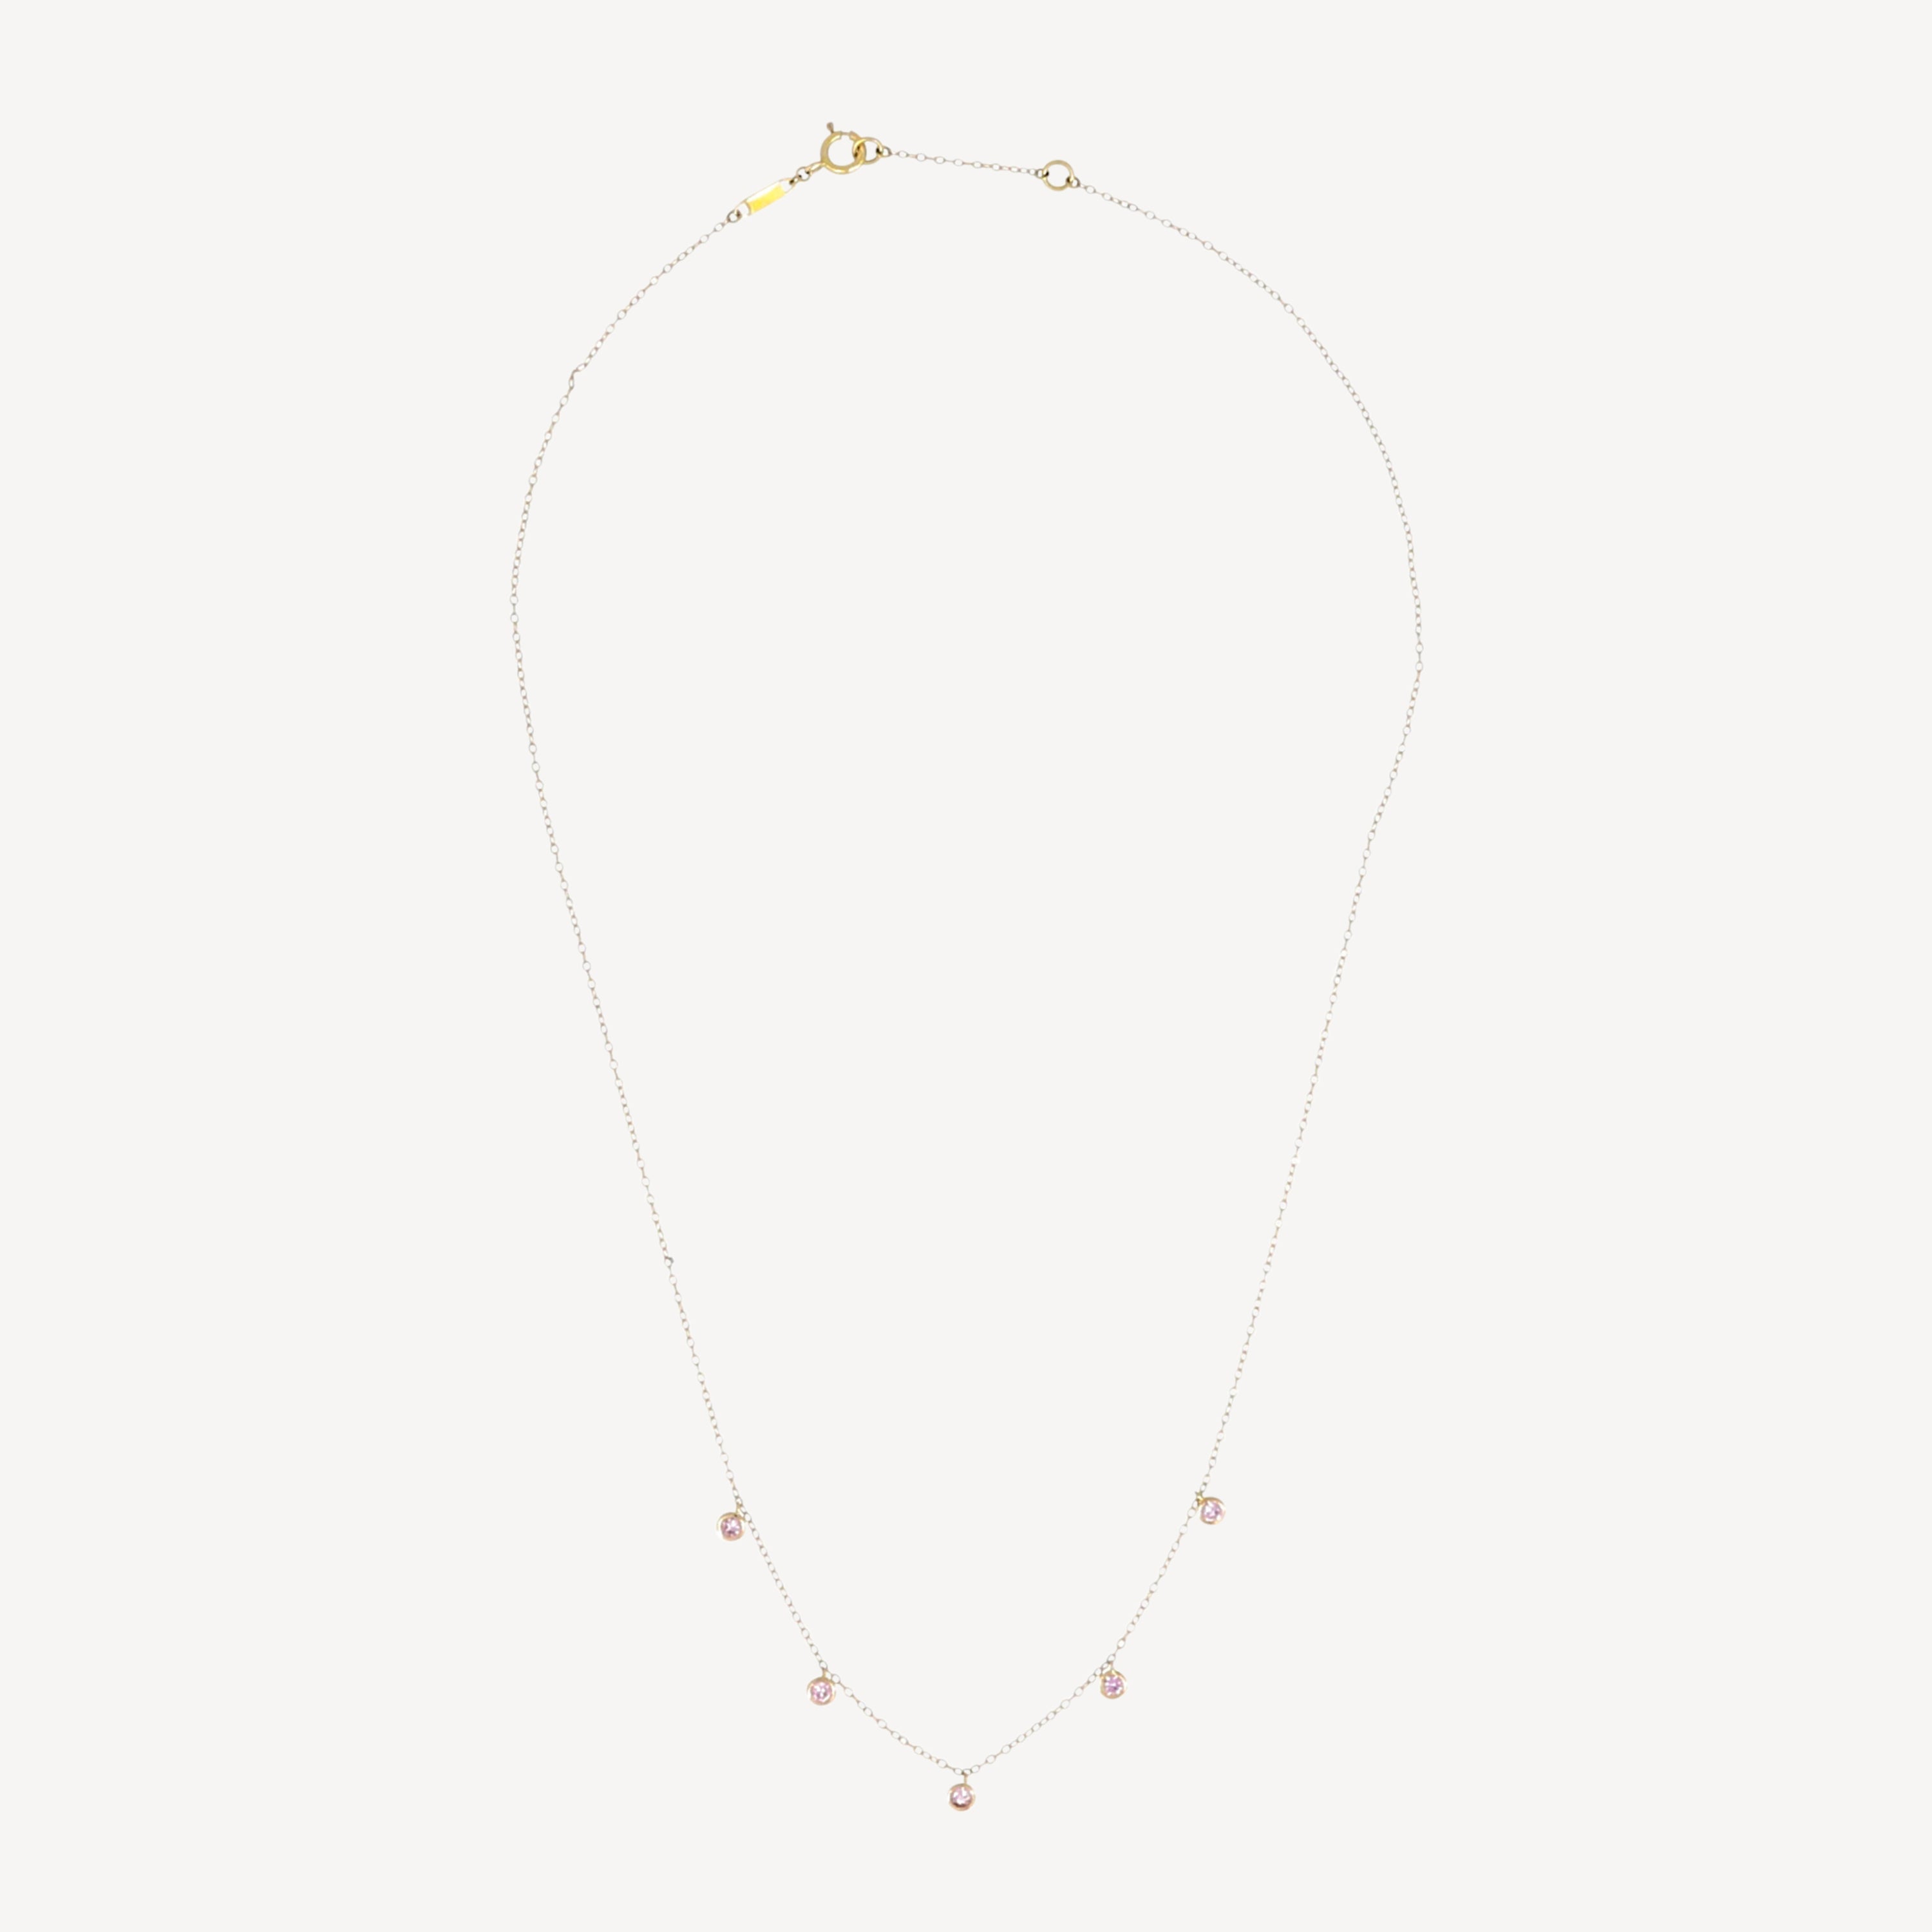 Collier 5 Saphirs Roses